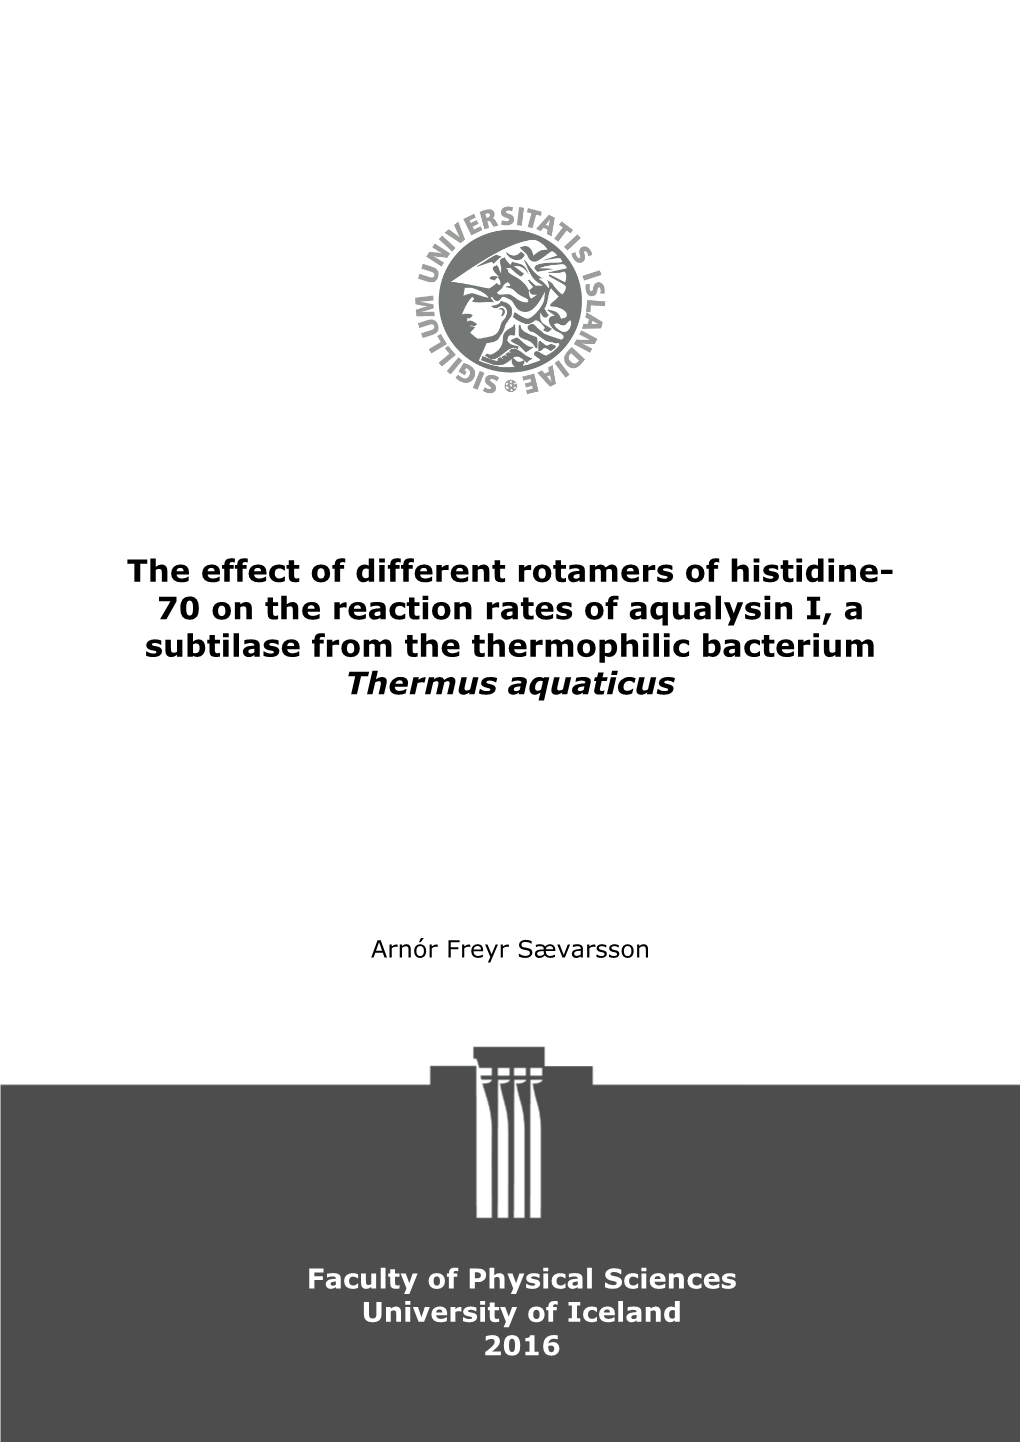 The Effect of Different Rotamers of Histidine- 70 on the Reaction Rates of Aqualysin I, a Subtilase from the Thermophilic Bacterium Thermus Aquaticus